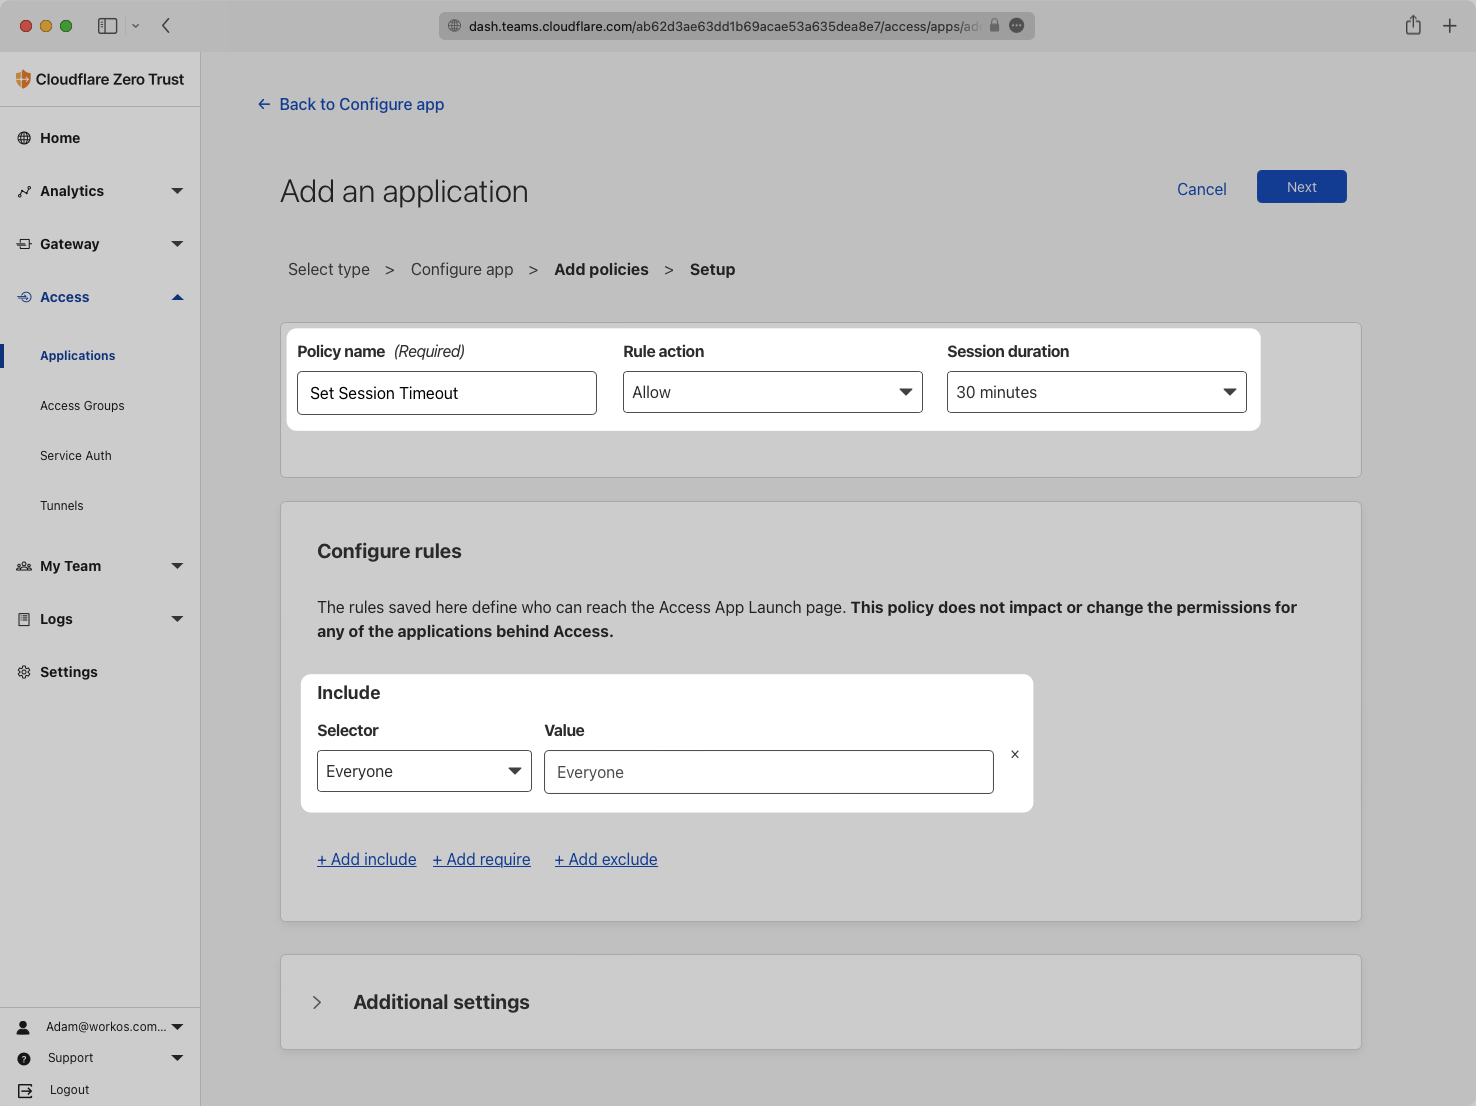 A screenshot showing where to configure policy and rules for the Cloudflare application.